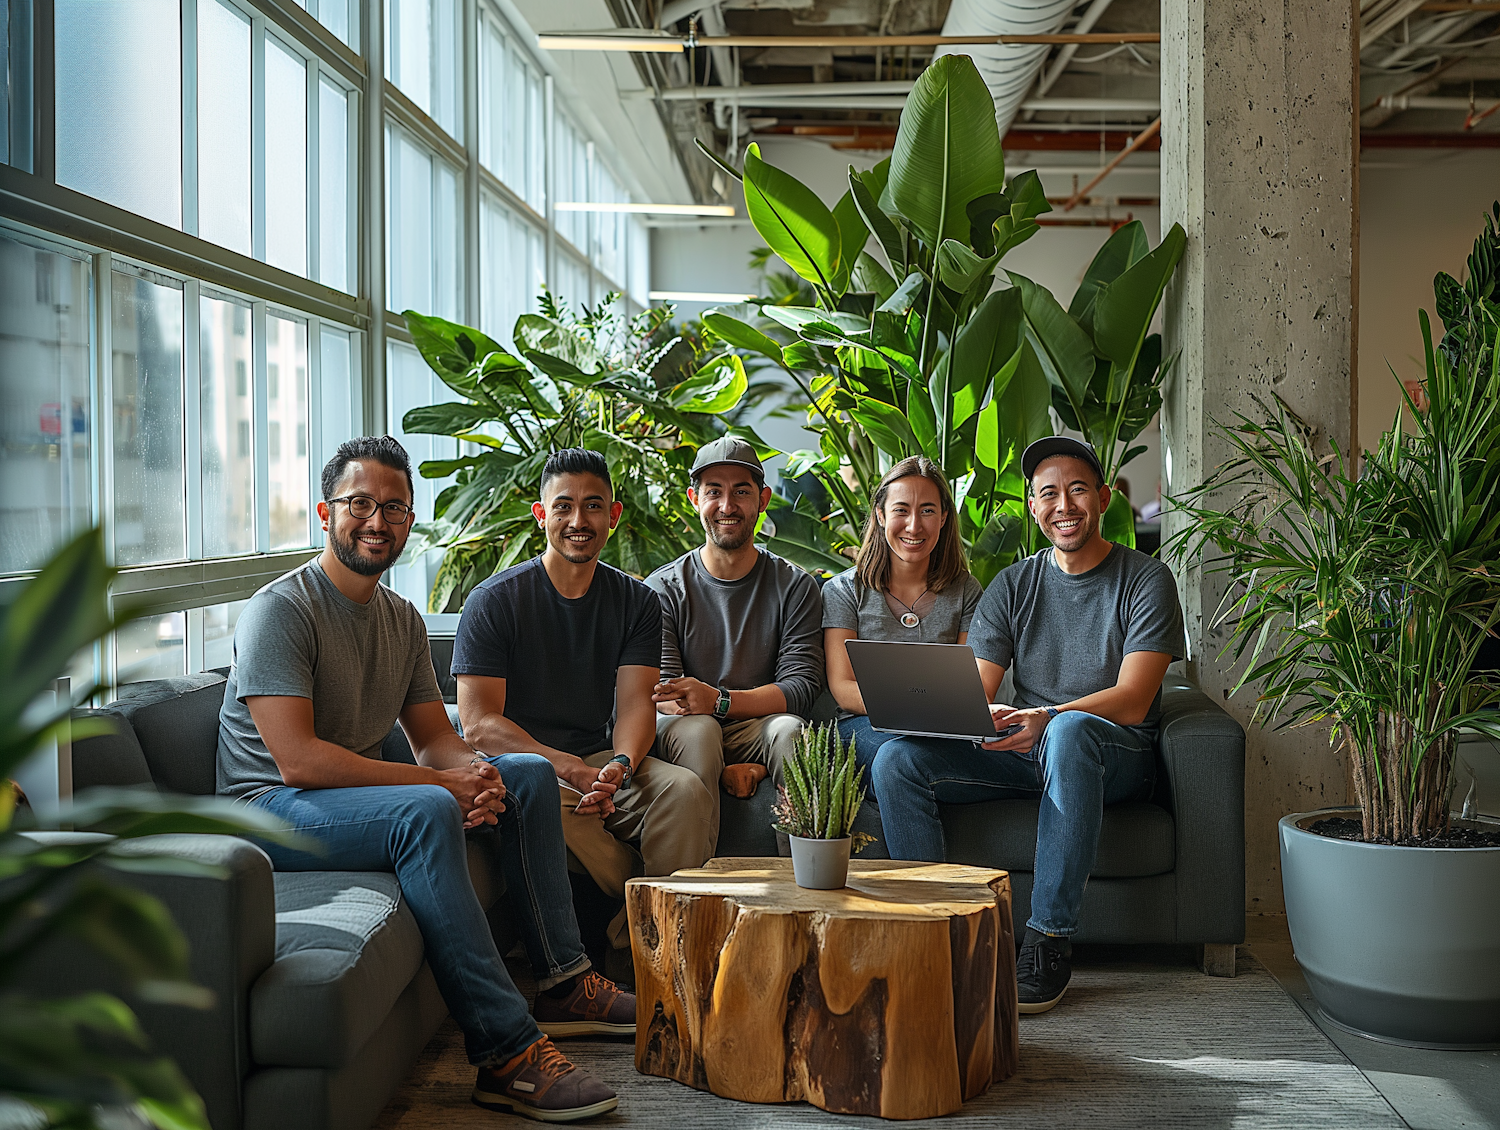 Casual Tech Team Collaboration in a Plant-filled Workspace